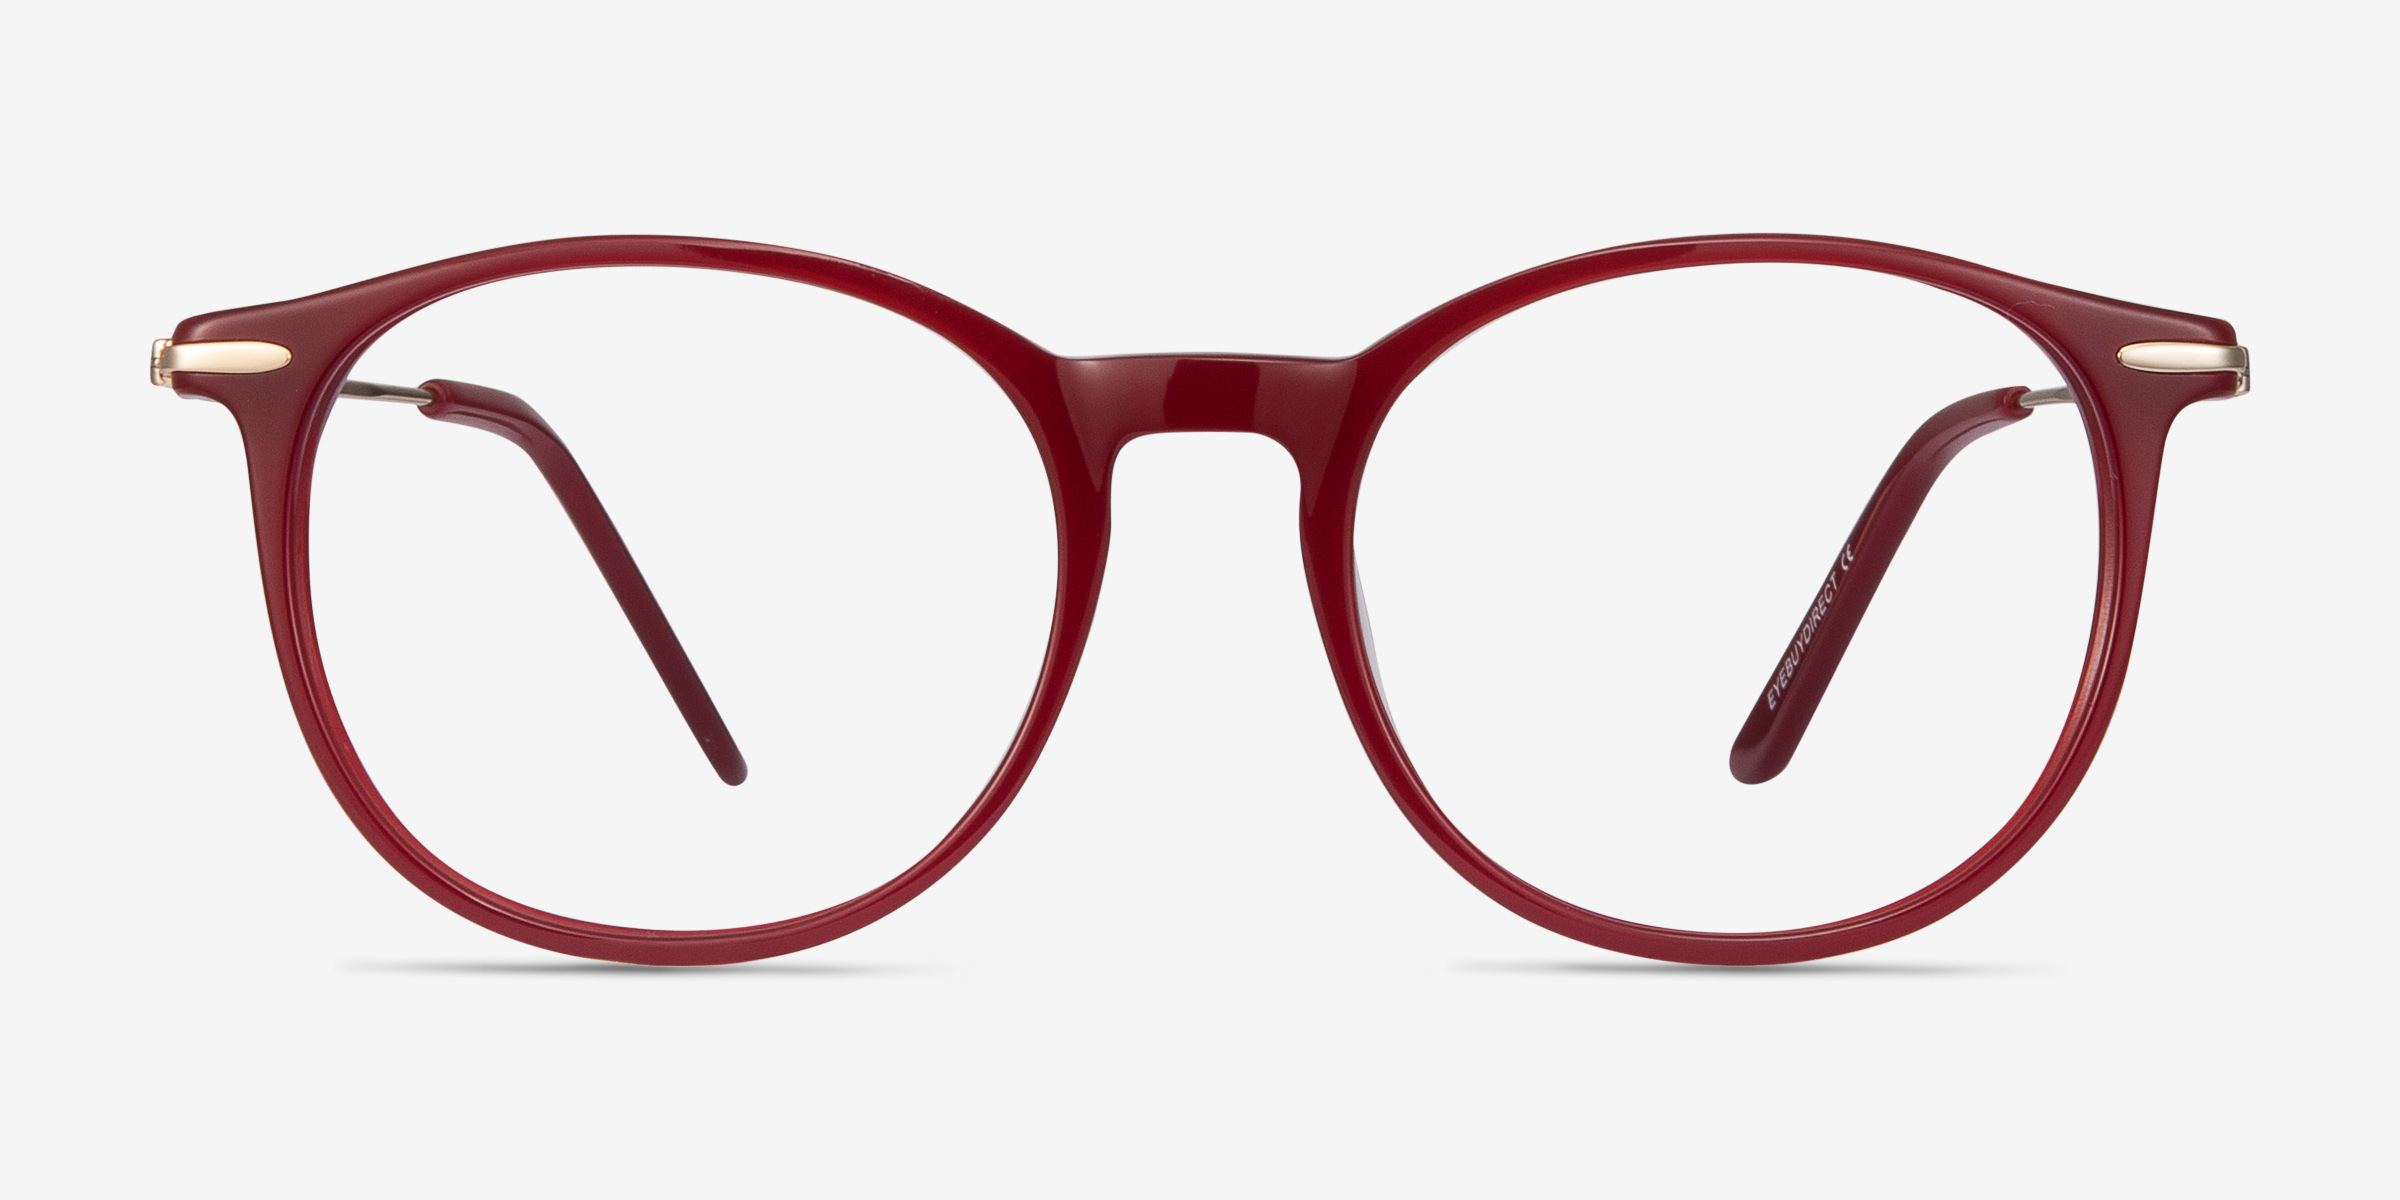 Quill Round Red Glasses For Women Eyebuydirect 